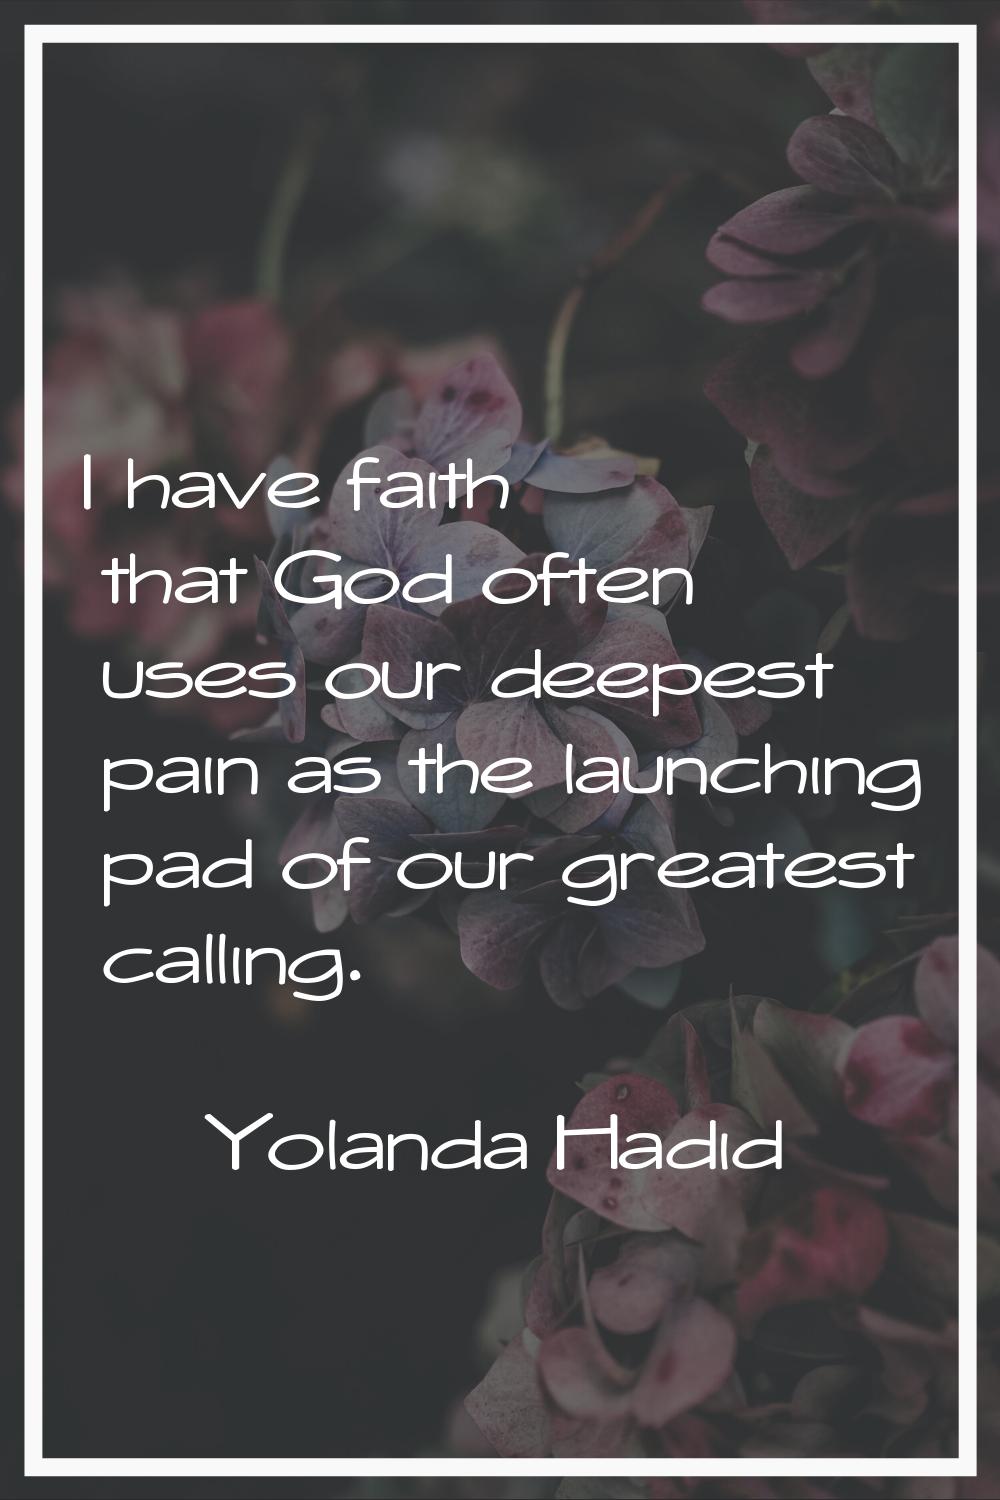 I have faith that God often uses our deepest pain as the launching pad of our greatest calling.